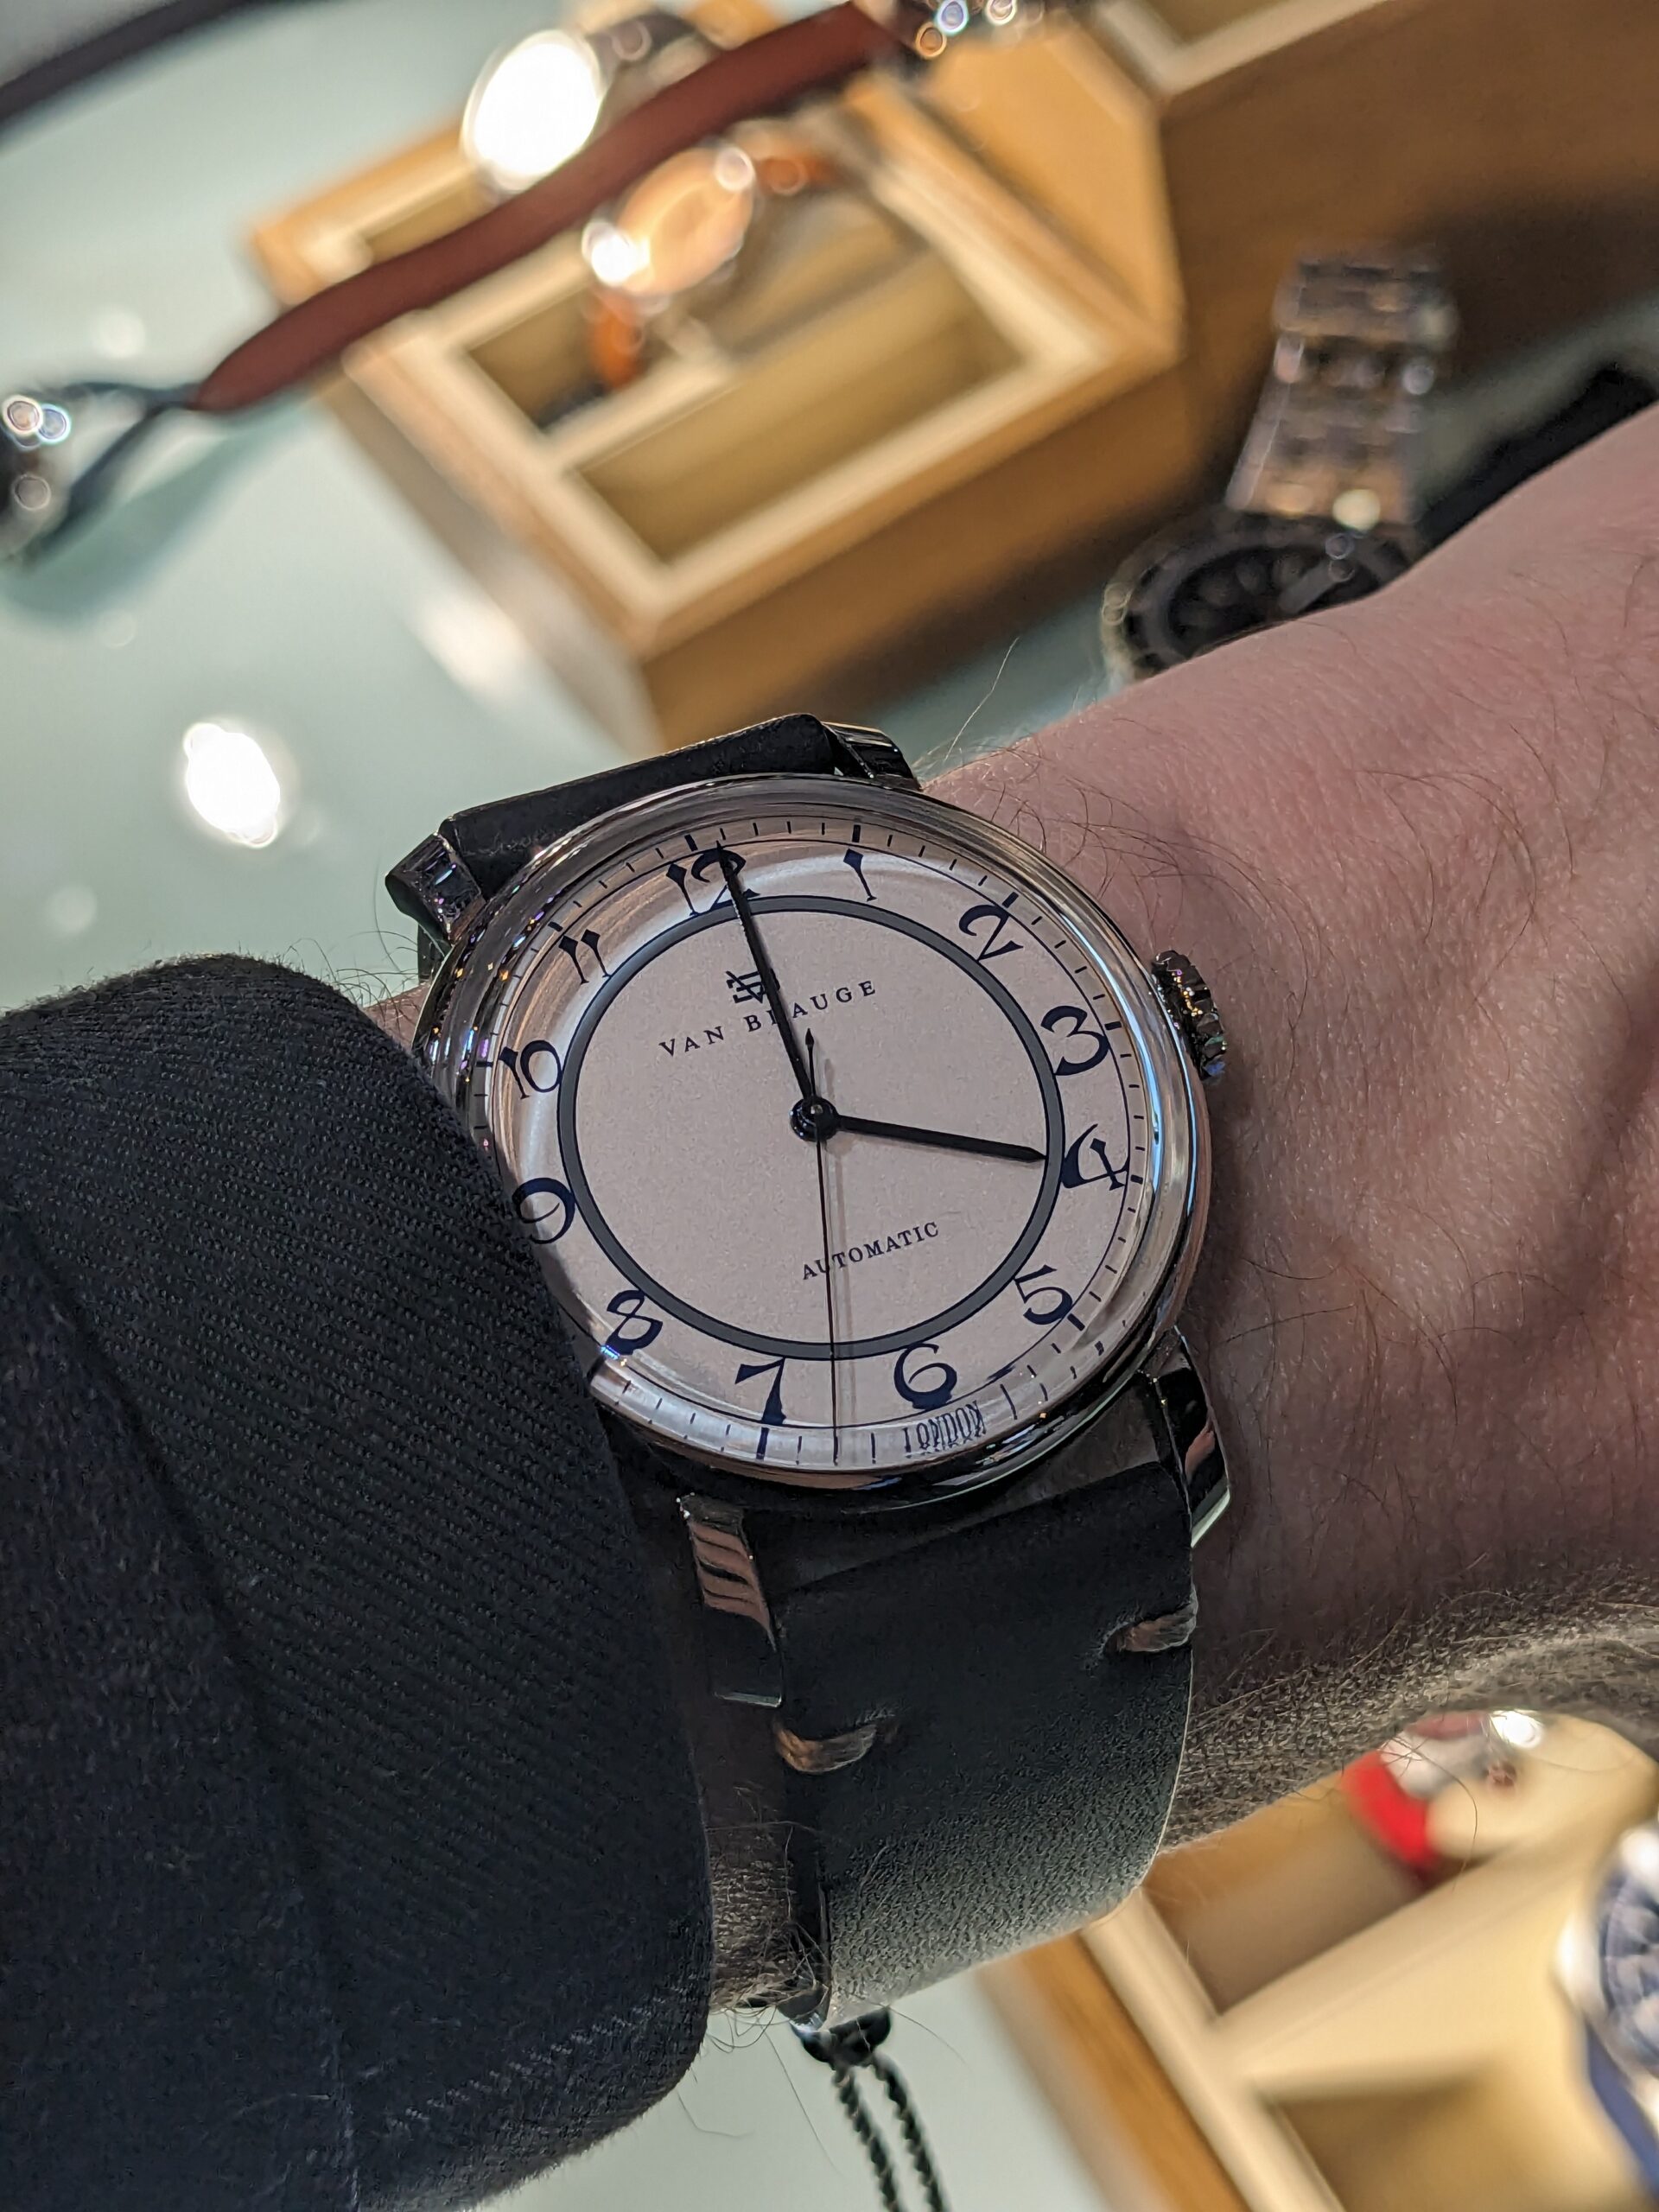 June Meetup With Van Brauge Watches and Rapport London